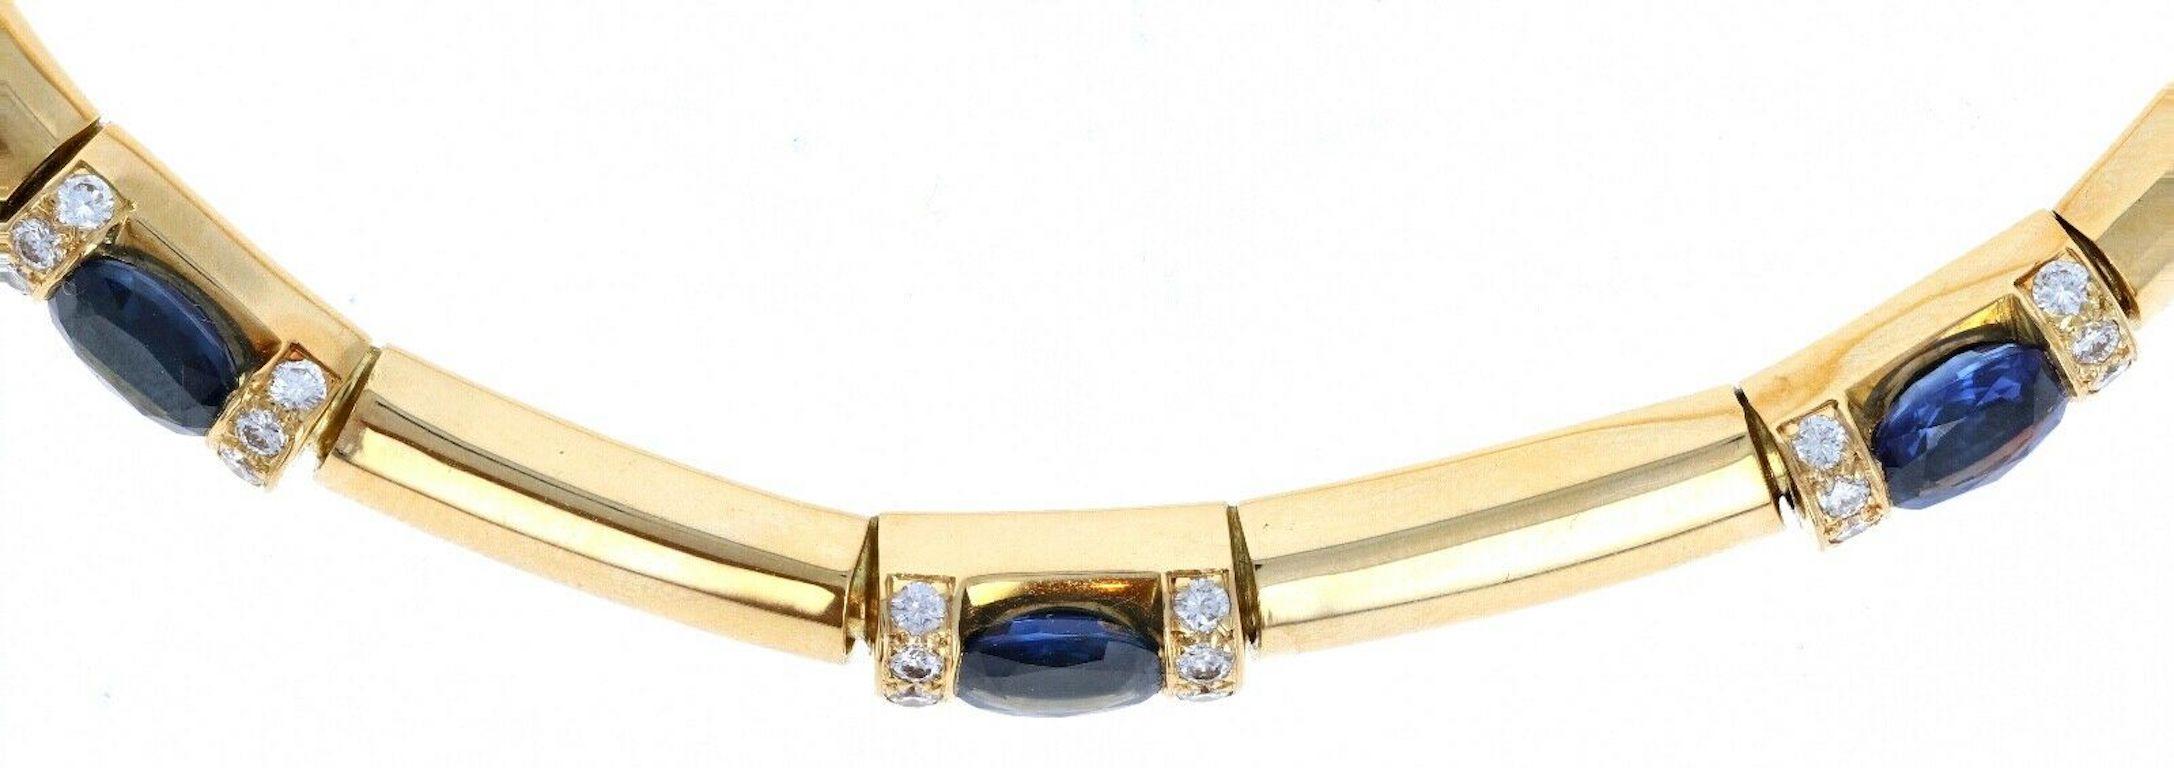 Chaumet 18K Yellow Gold, Sapphire & Diamond Necklace 68.8g

For sale is a Chaumet sapphire and diamond necklace. 
The necklace is ' inches in length 
Crafted in 18k yellow gold
approx. 0.30 cts of round brilliant cut diamonds.
3 sapphires equalling